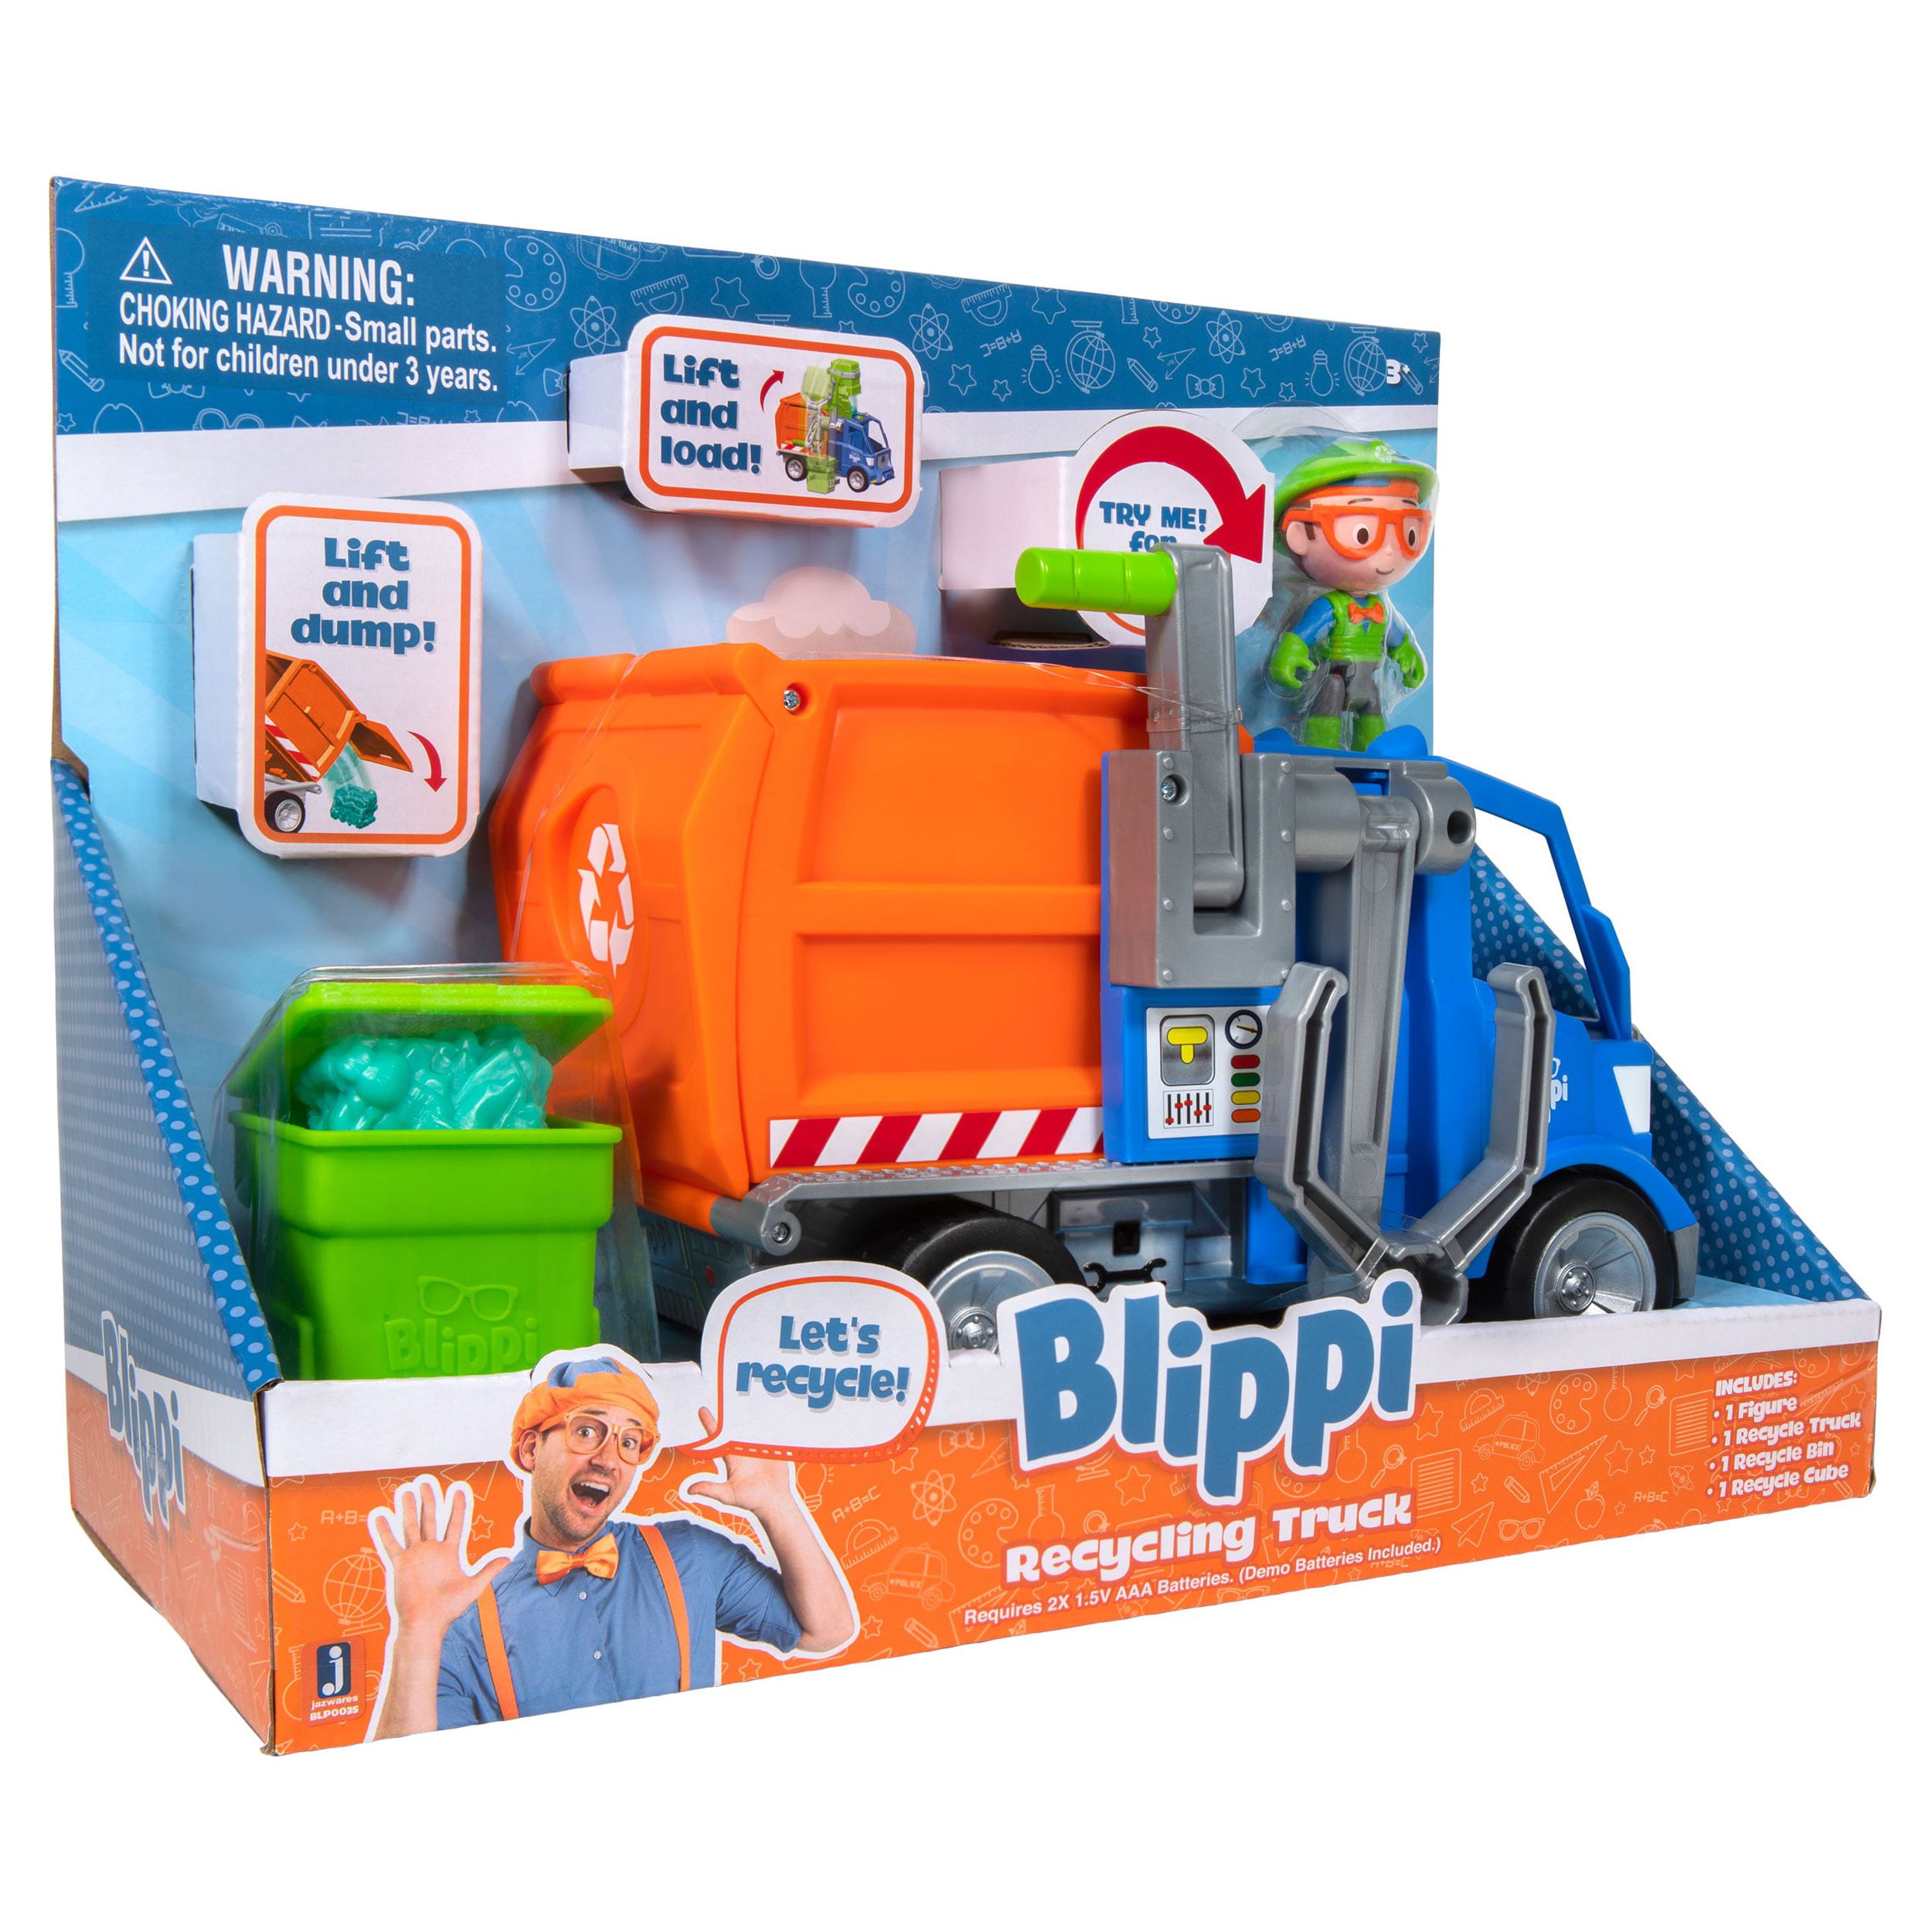 BLIPPI Recycling Truck Play Vehicle - image 17 of 18